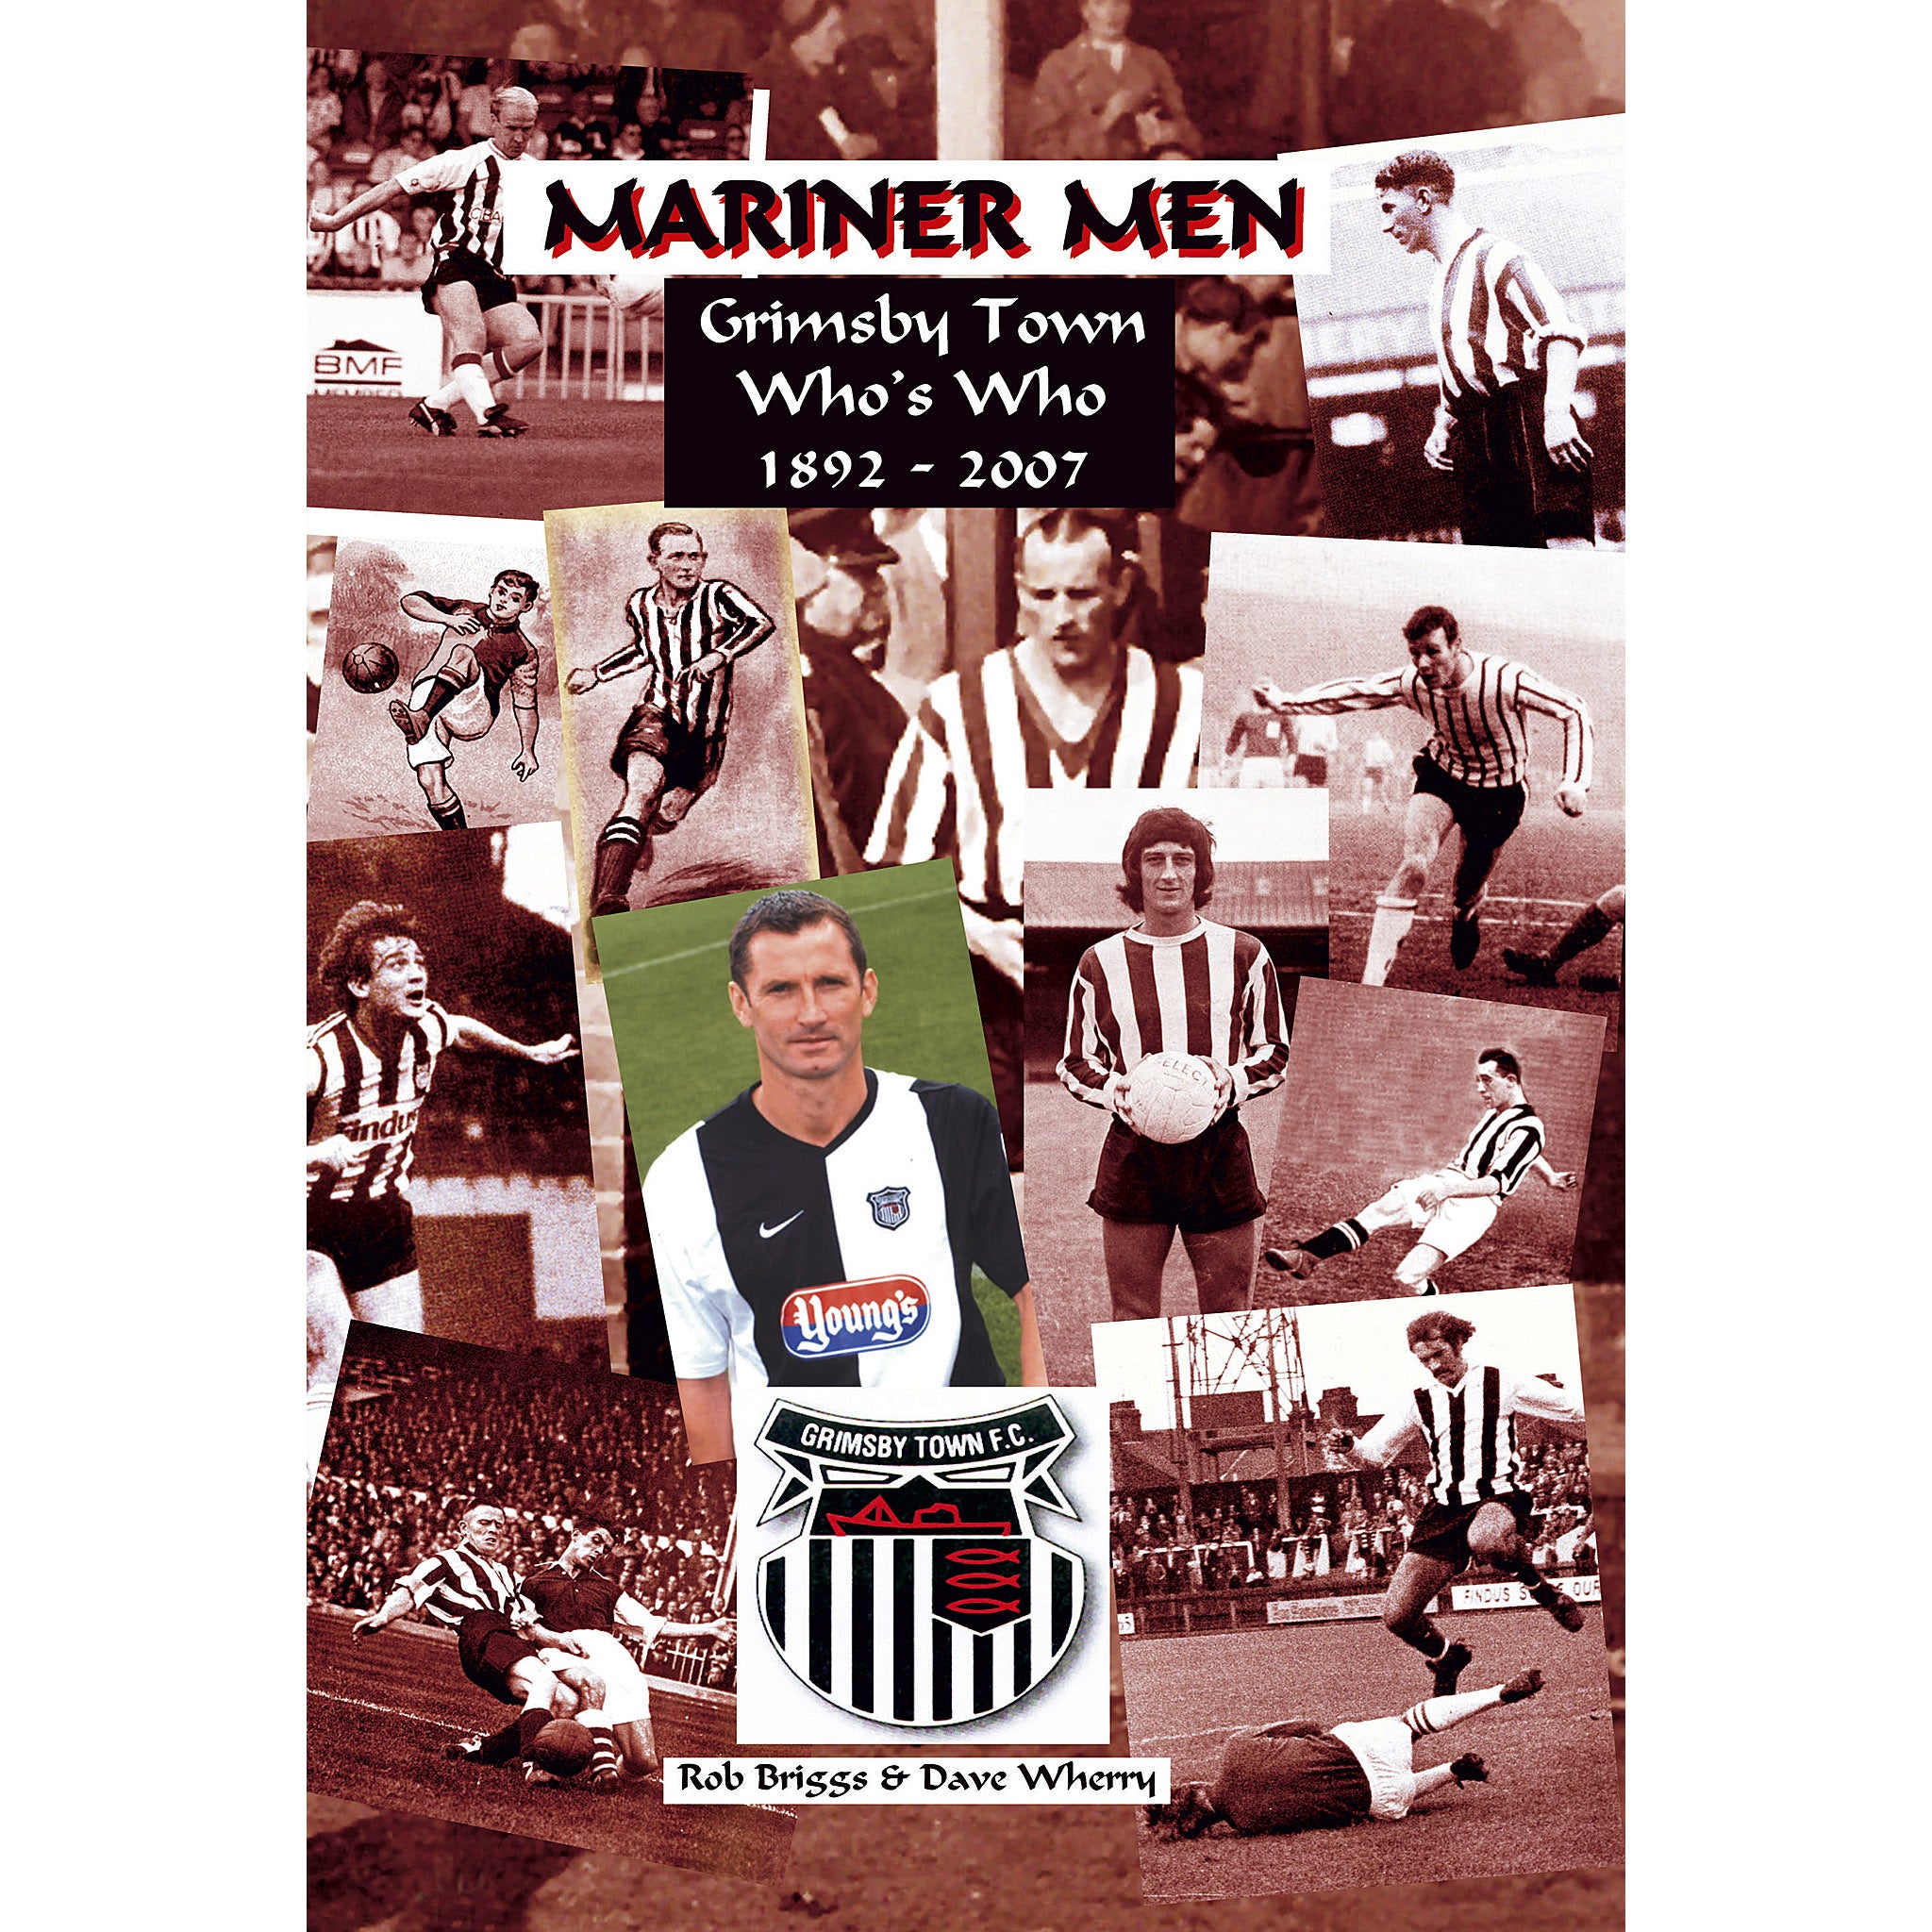 Mariner Men – Grimsby Town Who’s Who 1892-2007